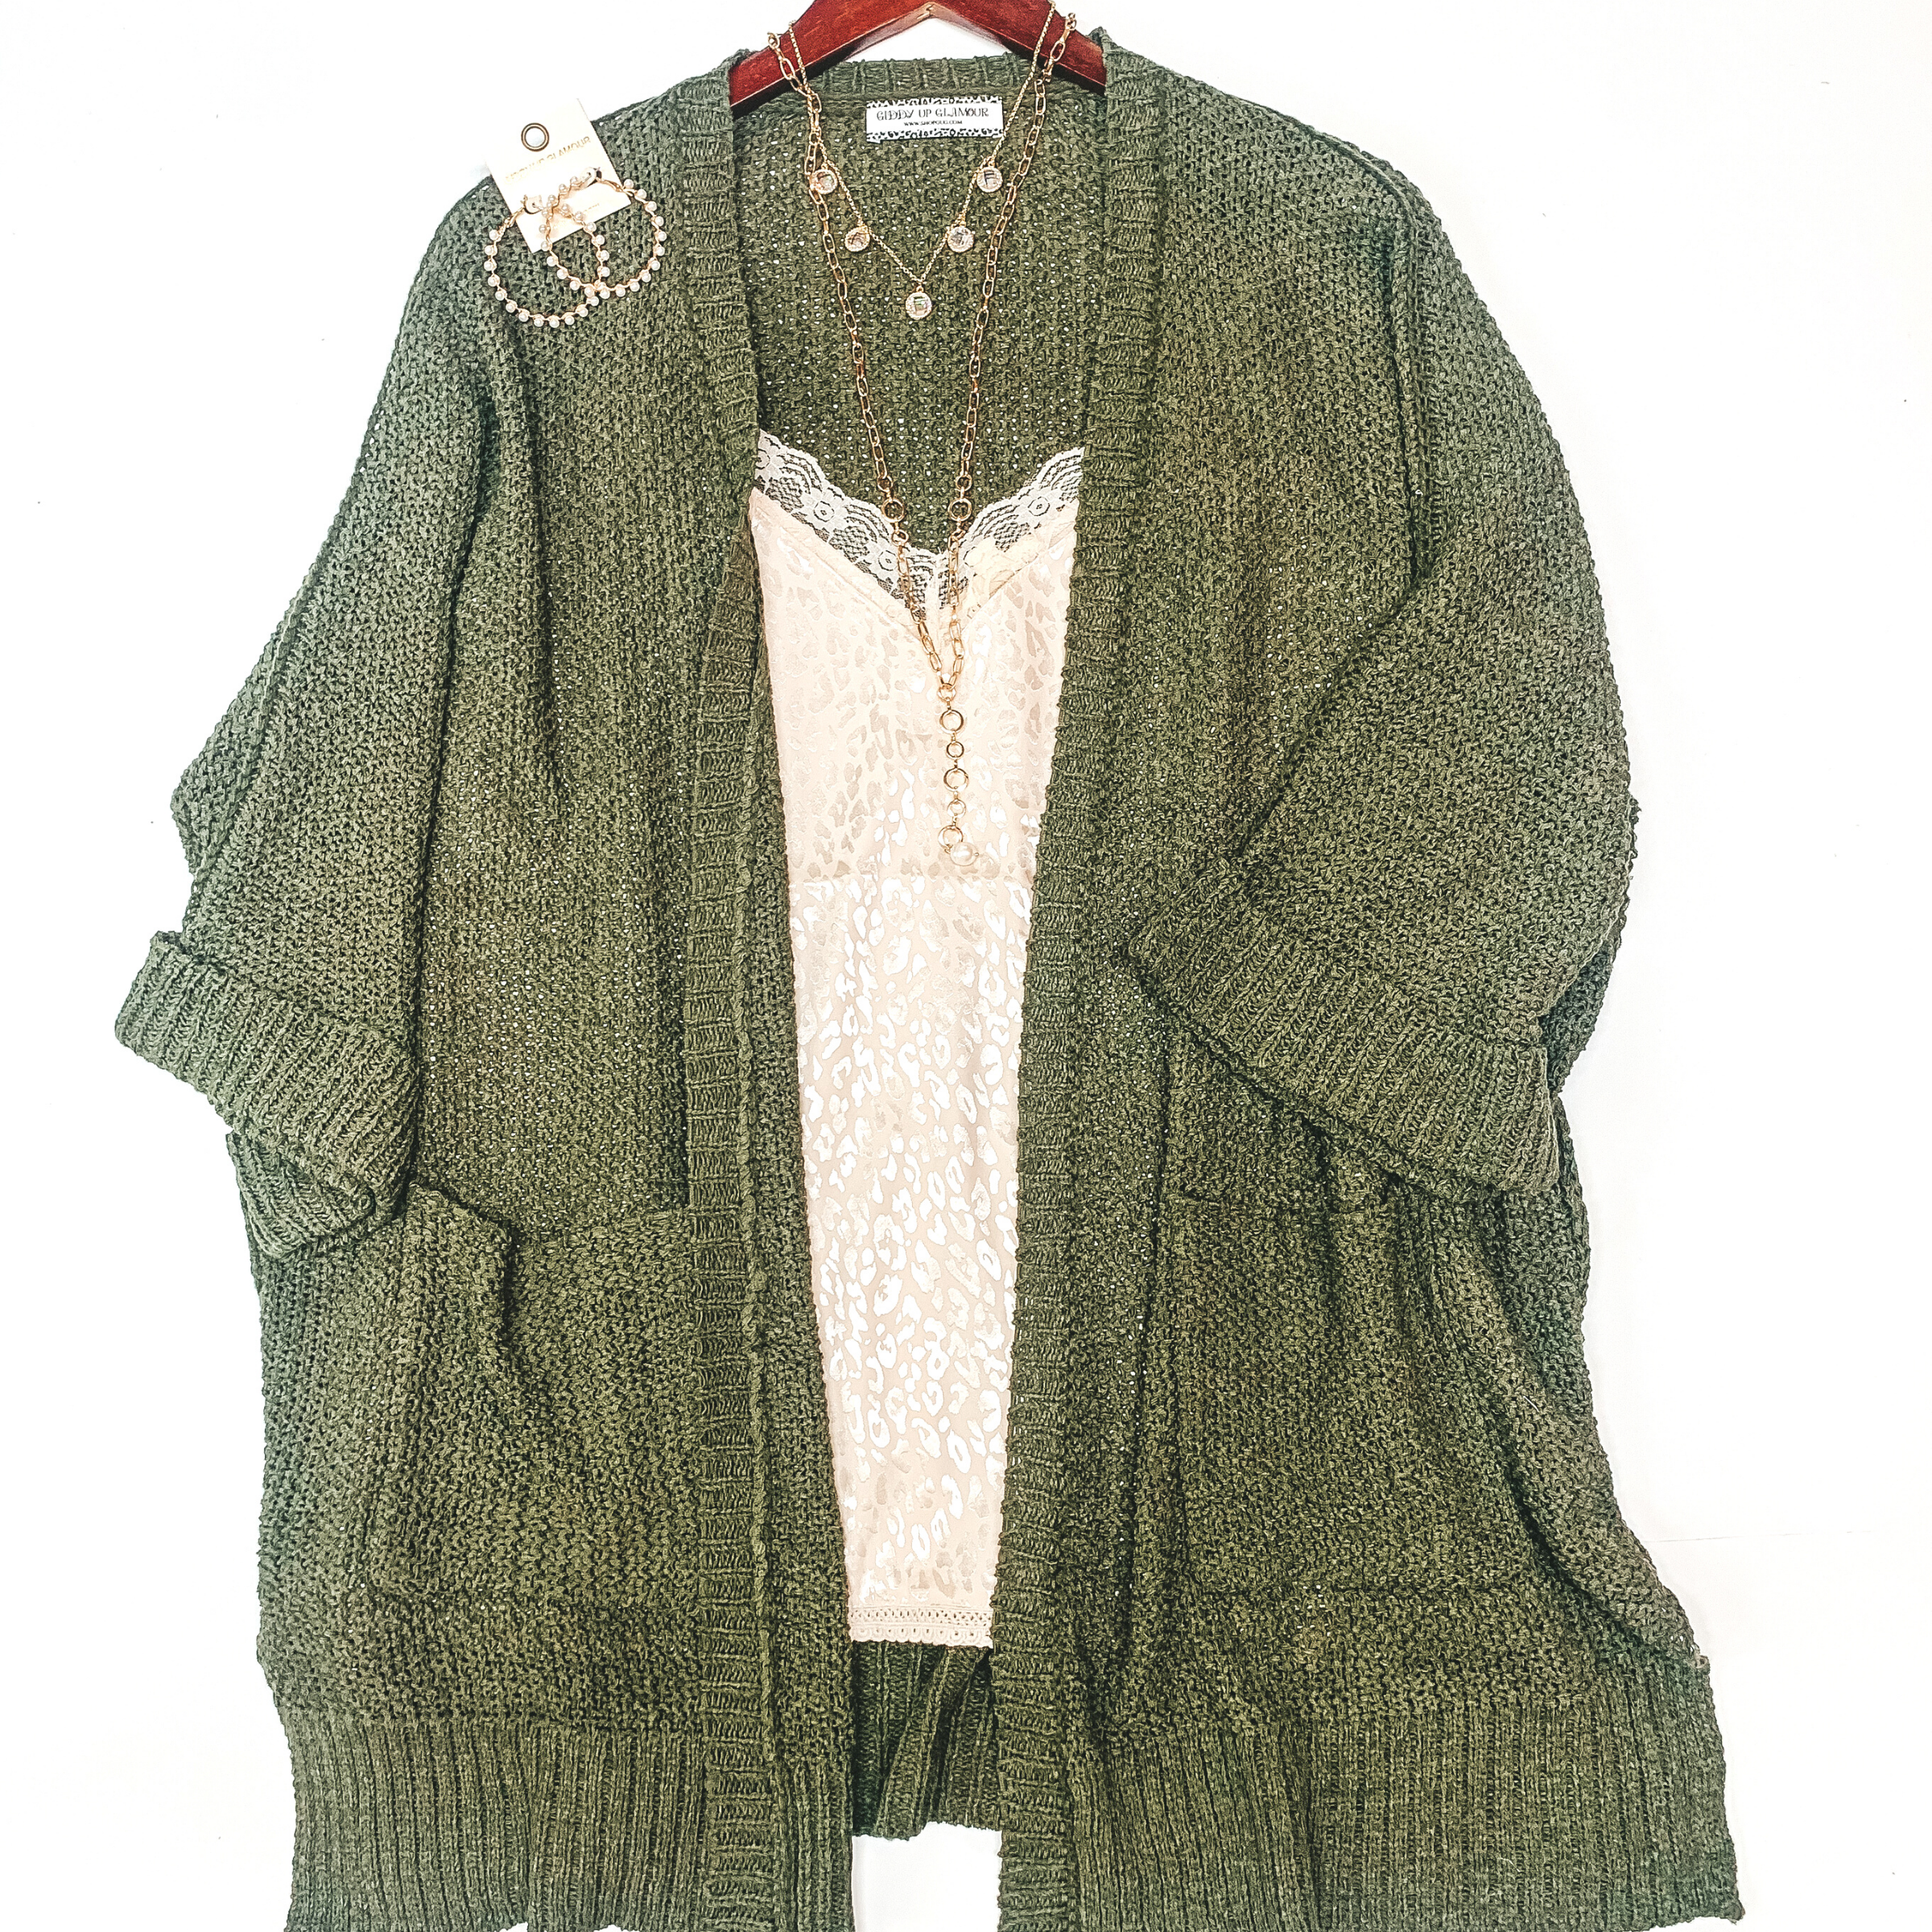 Warm Their Hearts Knit Cardigan with Pockets in Olive Green - Giddy Up Glamour Boutique